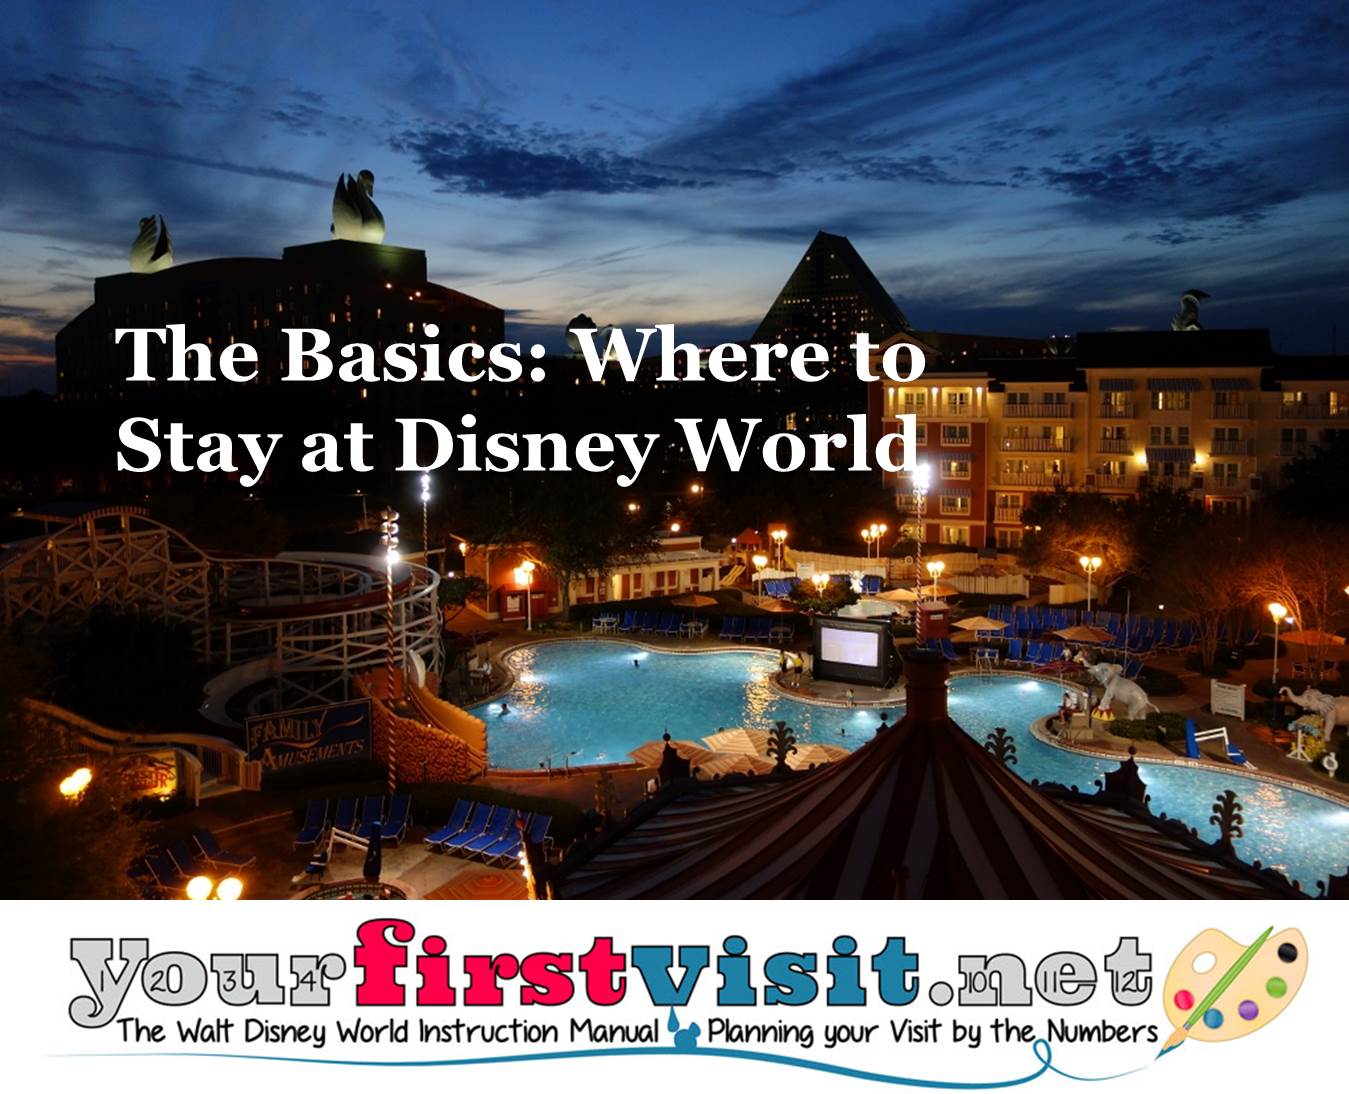 The Basics - Where to Stay at Disney World from yourfirstvisit.net